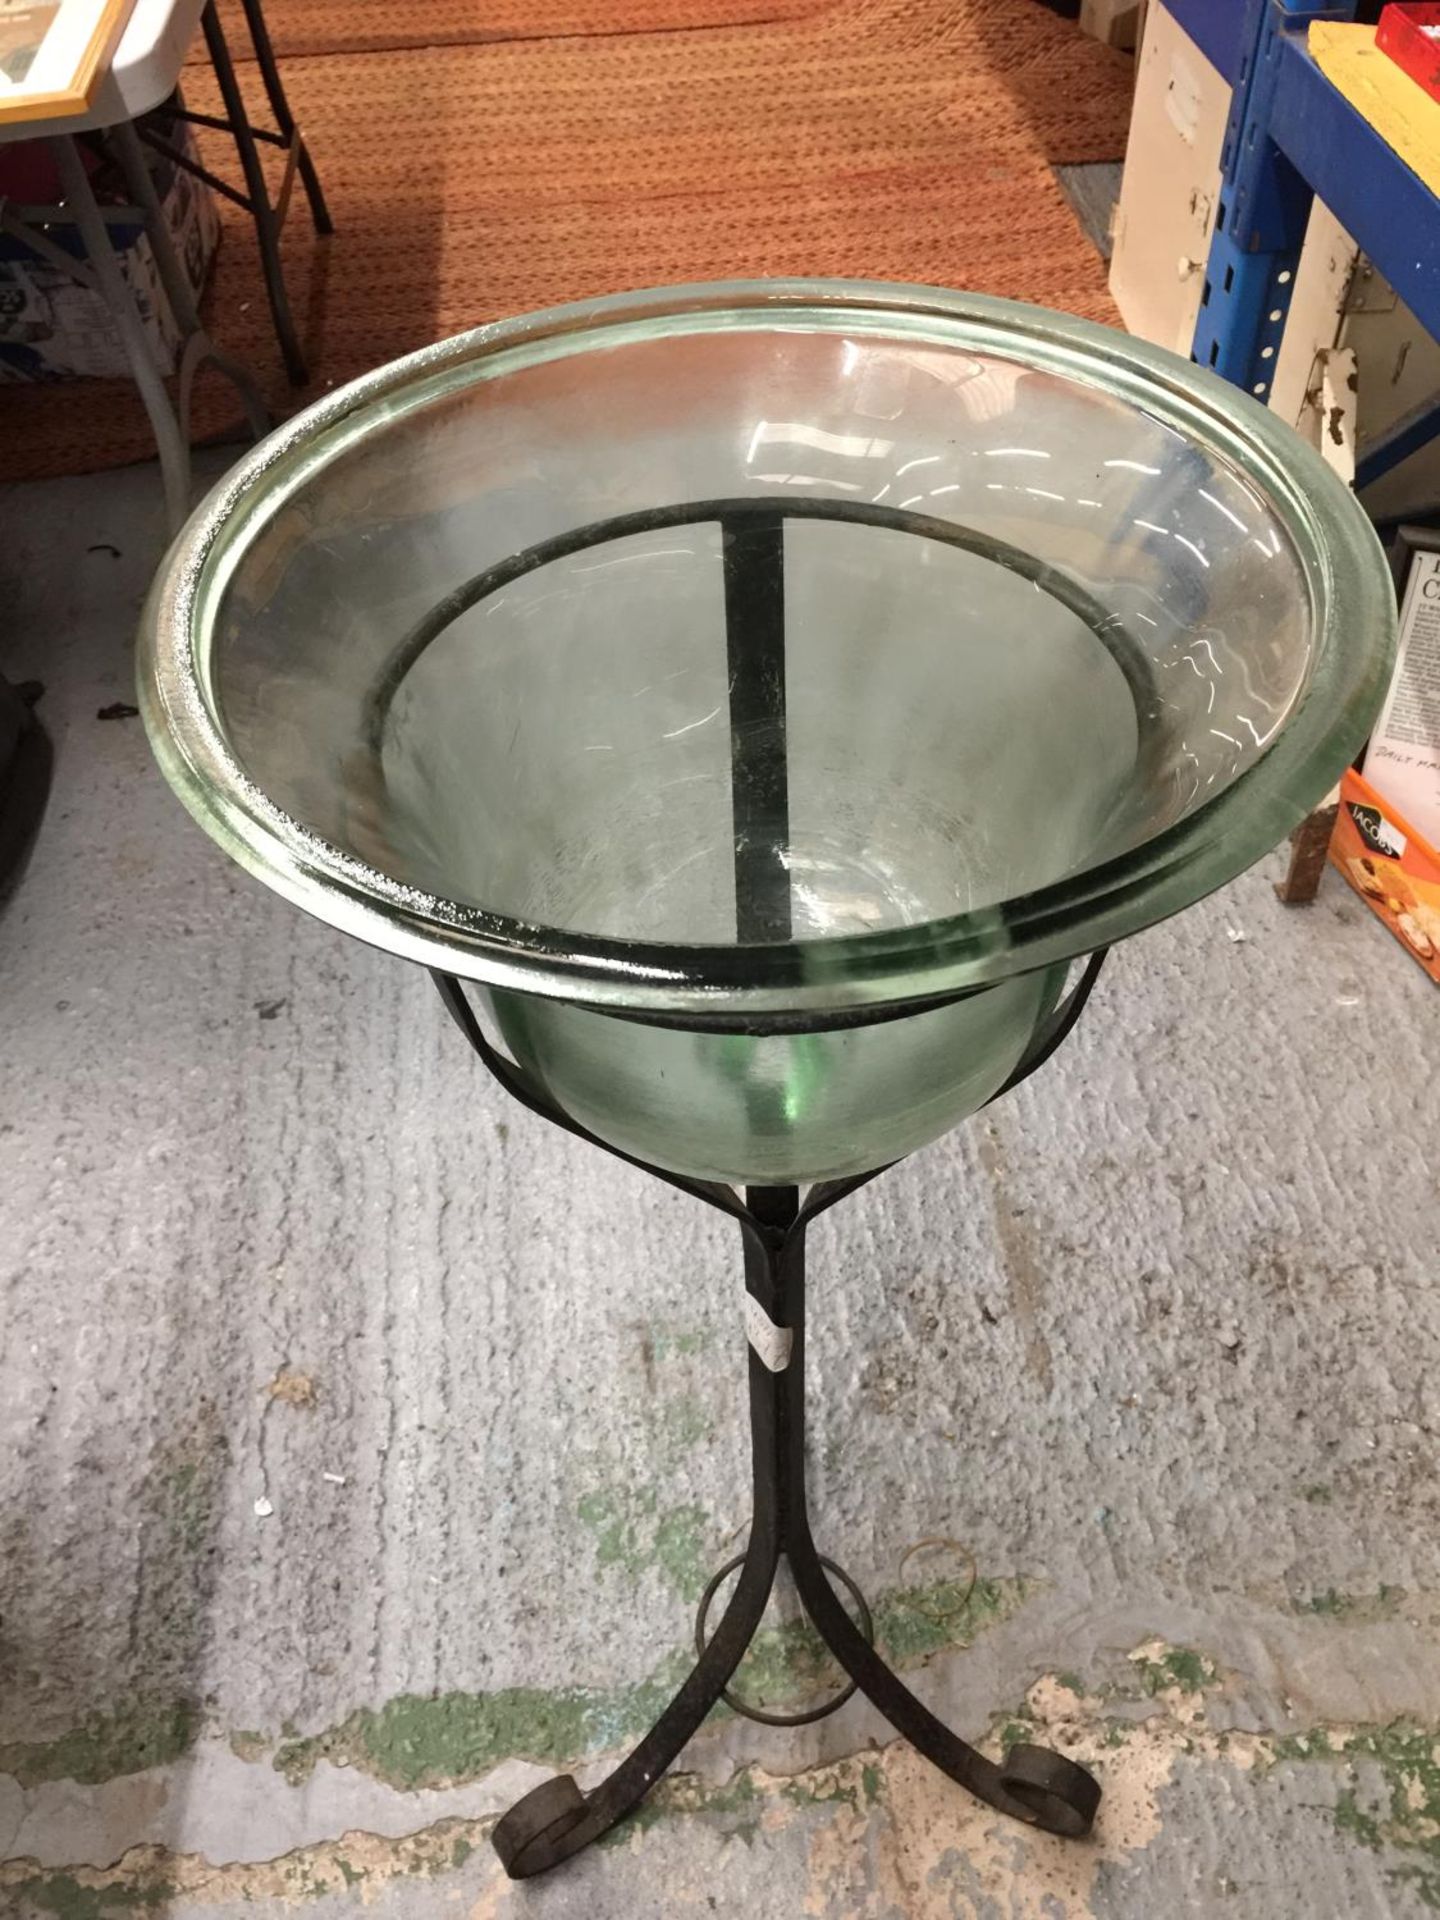 A LARGE BELL SHAPED GLASS BOWL ON A WROUGHT IRON STAND H: 96CM - Image 2 of 4